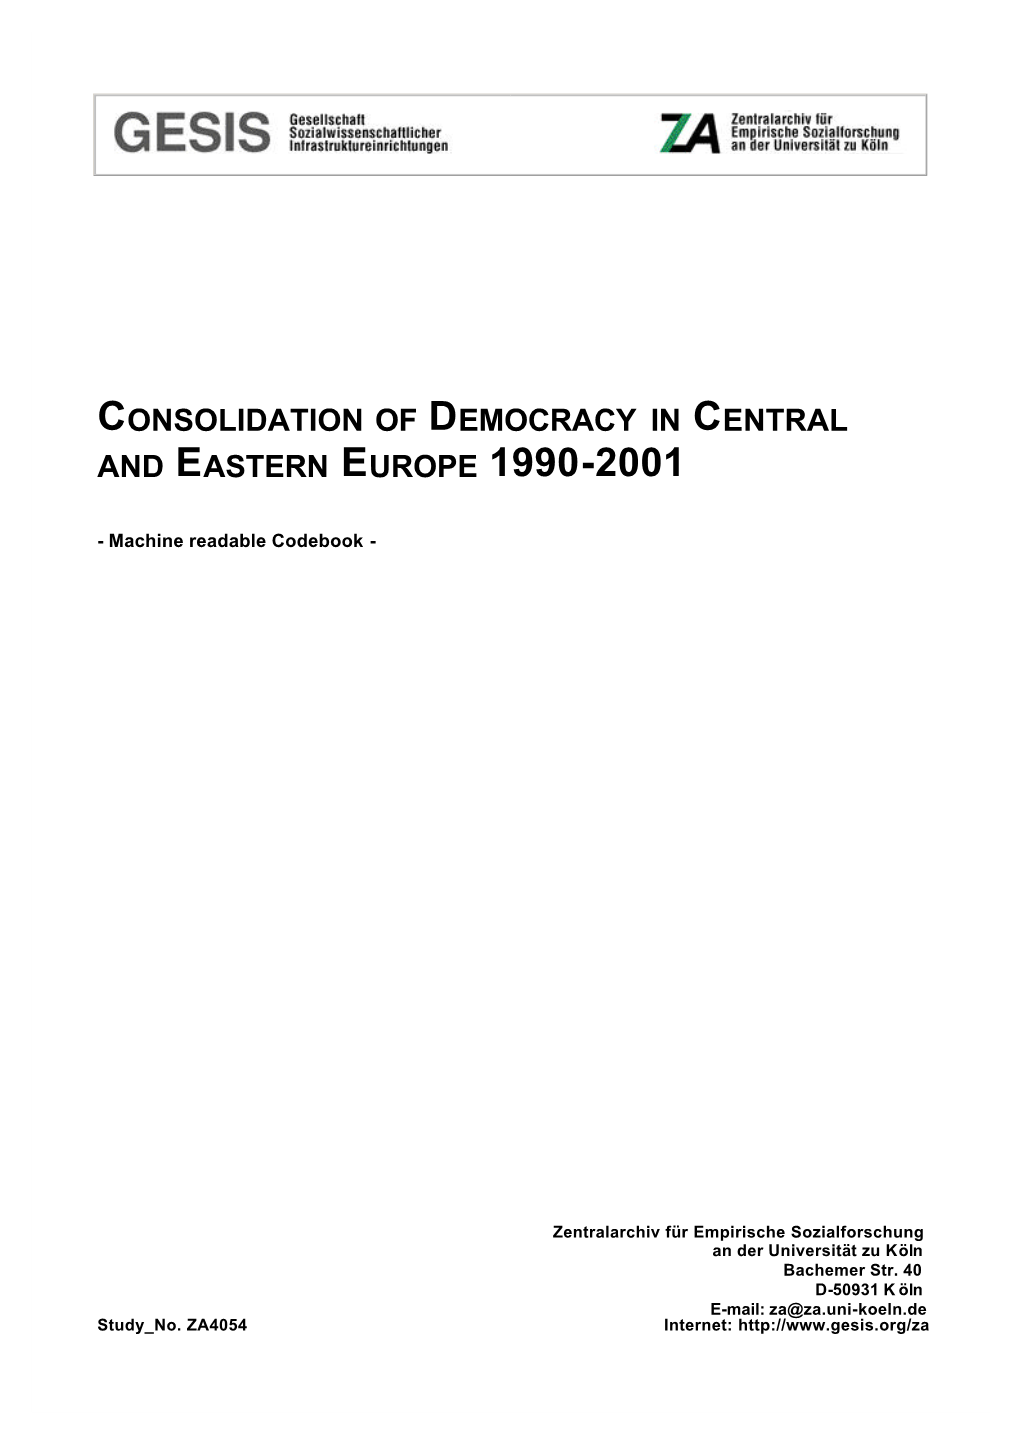 Consolidation of Democracy in Central and Eastern Europe 1990-2001